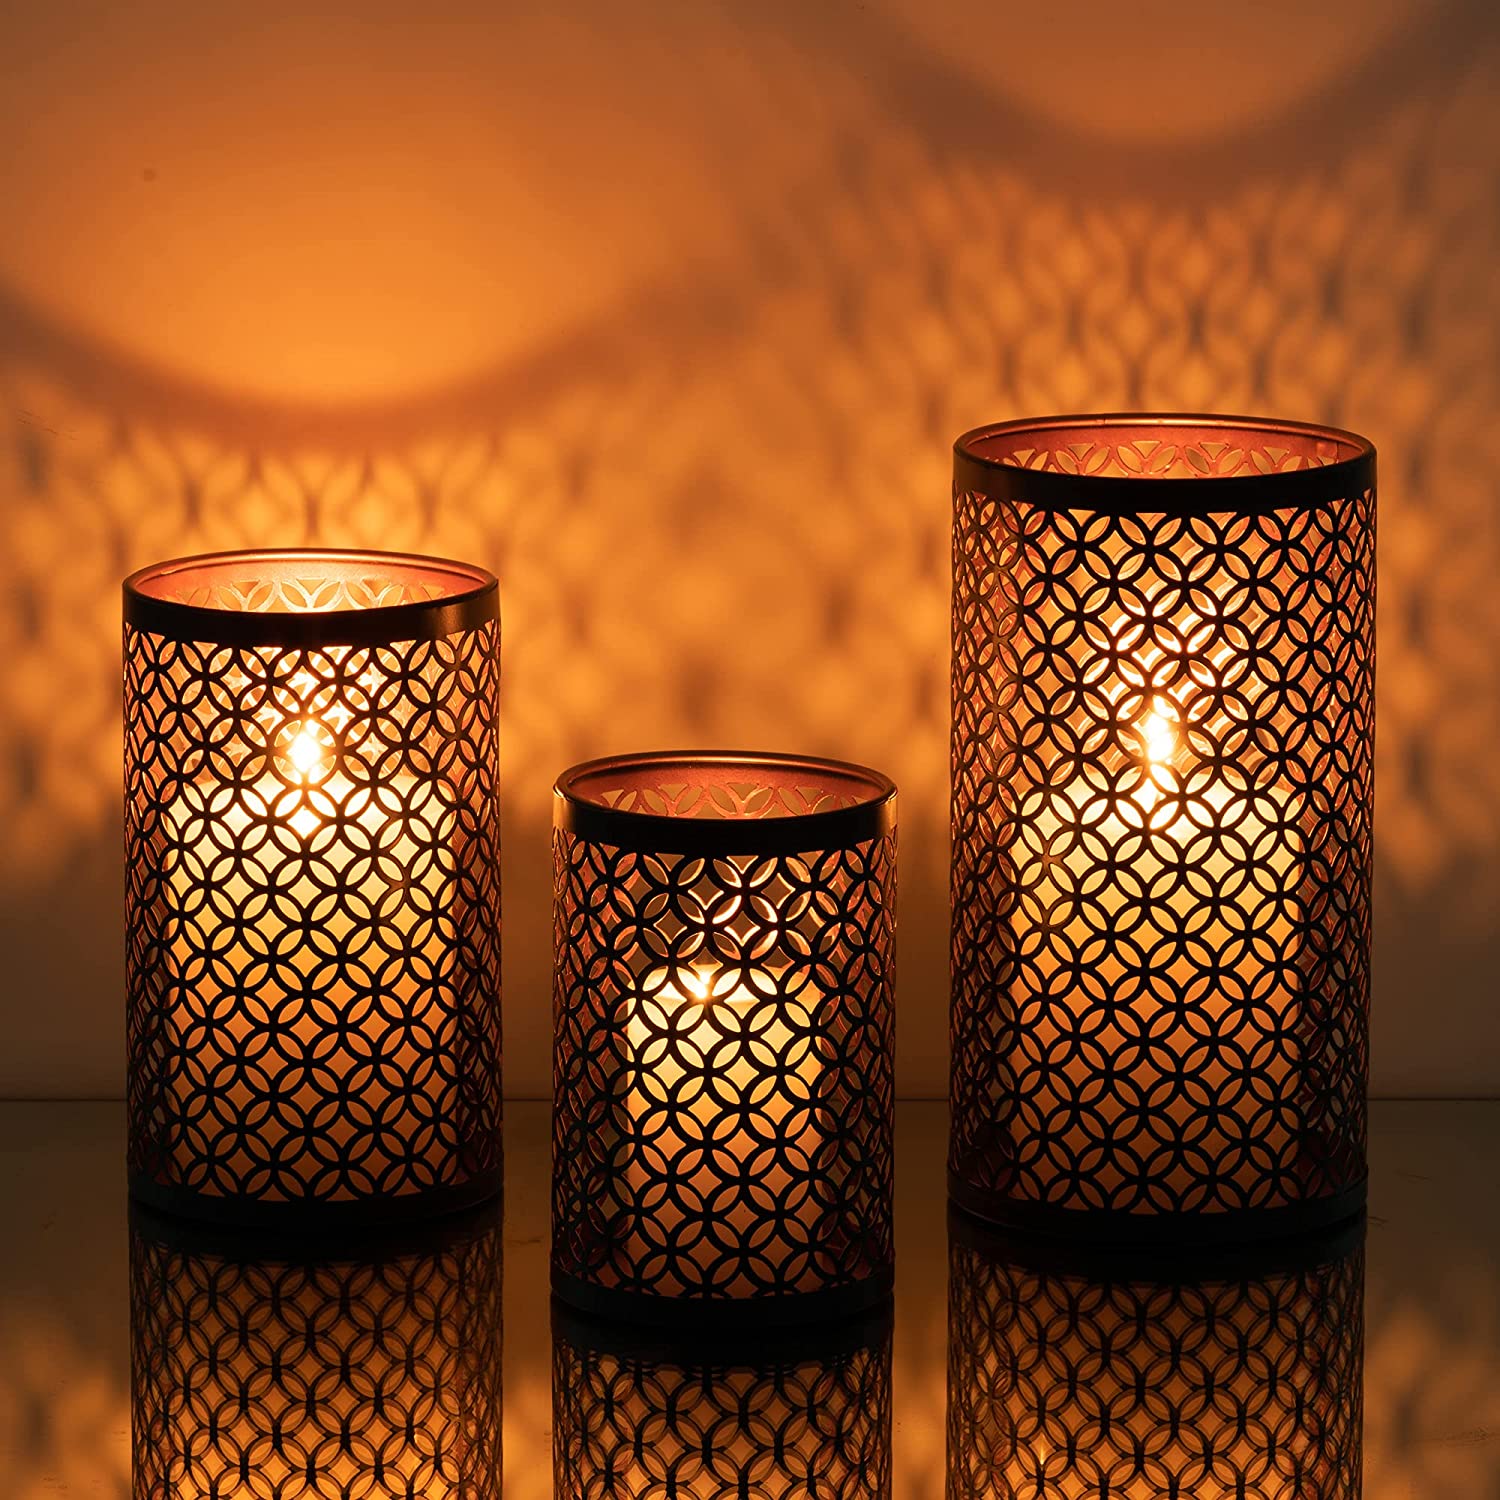 Garden Table Accessories | Romadedi Candle Holder Set